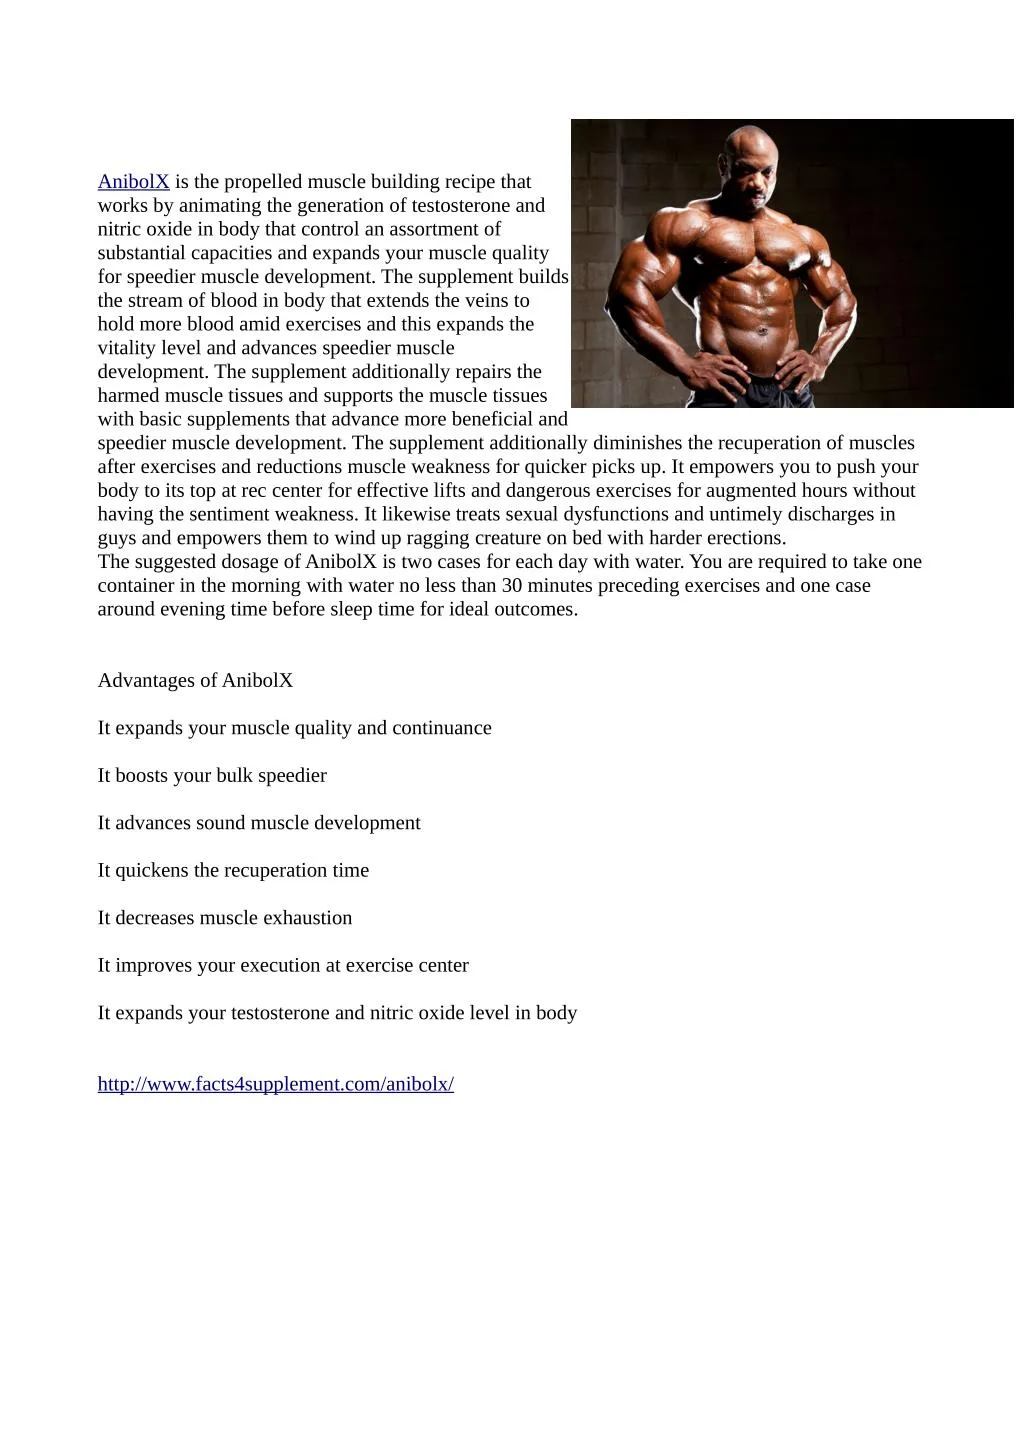 anibolx is the propelled muscle building recipe